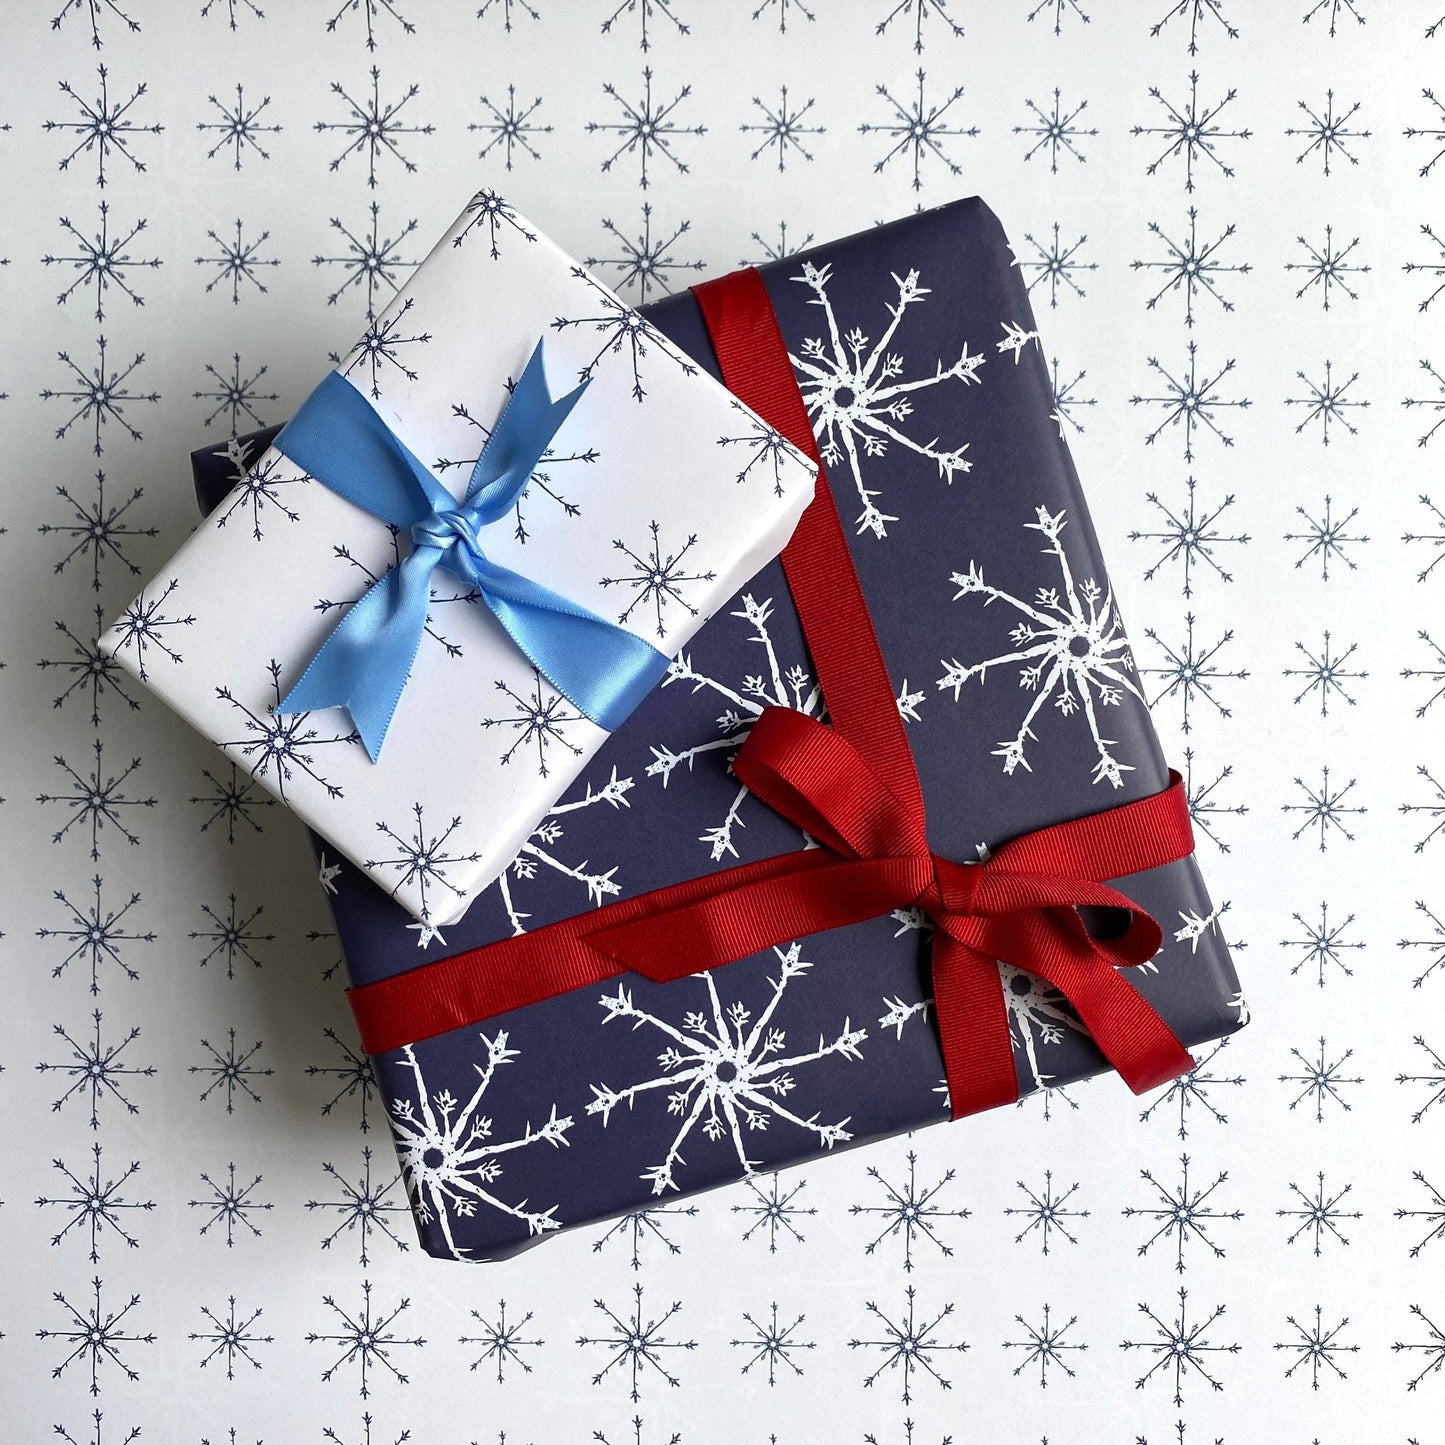 White Snowflake Wrapping Paper: Rolls of 3 Sheet